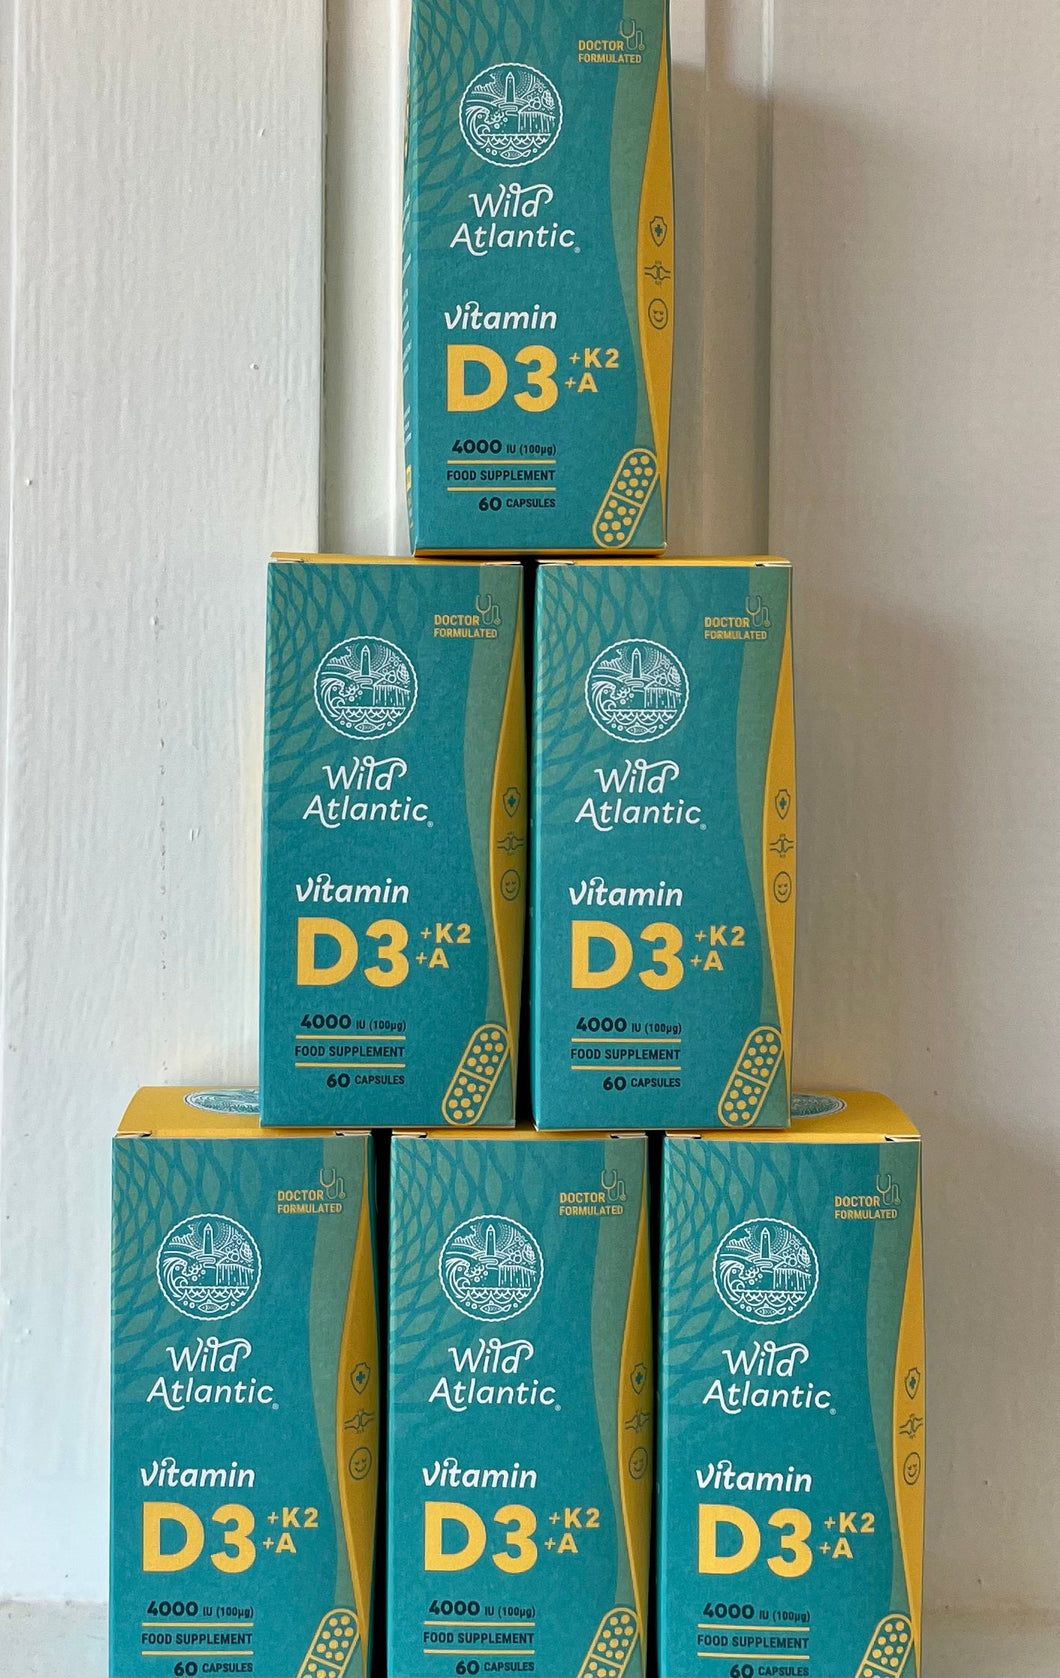 Test Kit for Vitamin D3 + K2 + A by Wild Atlantic